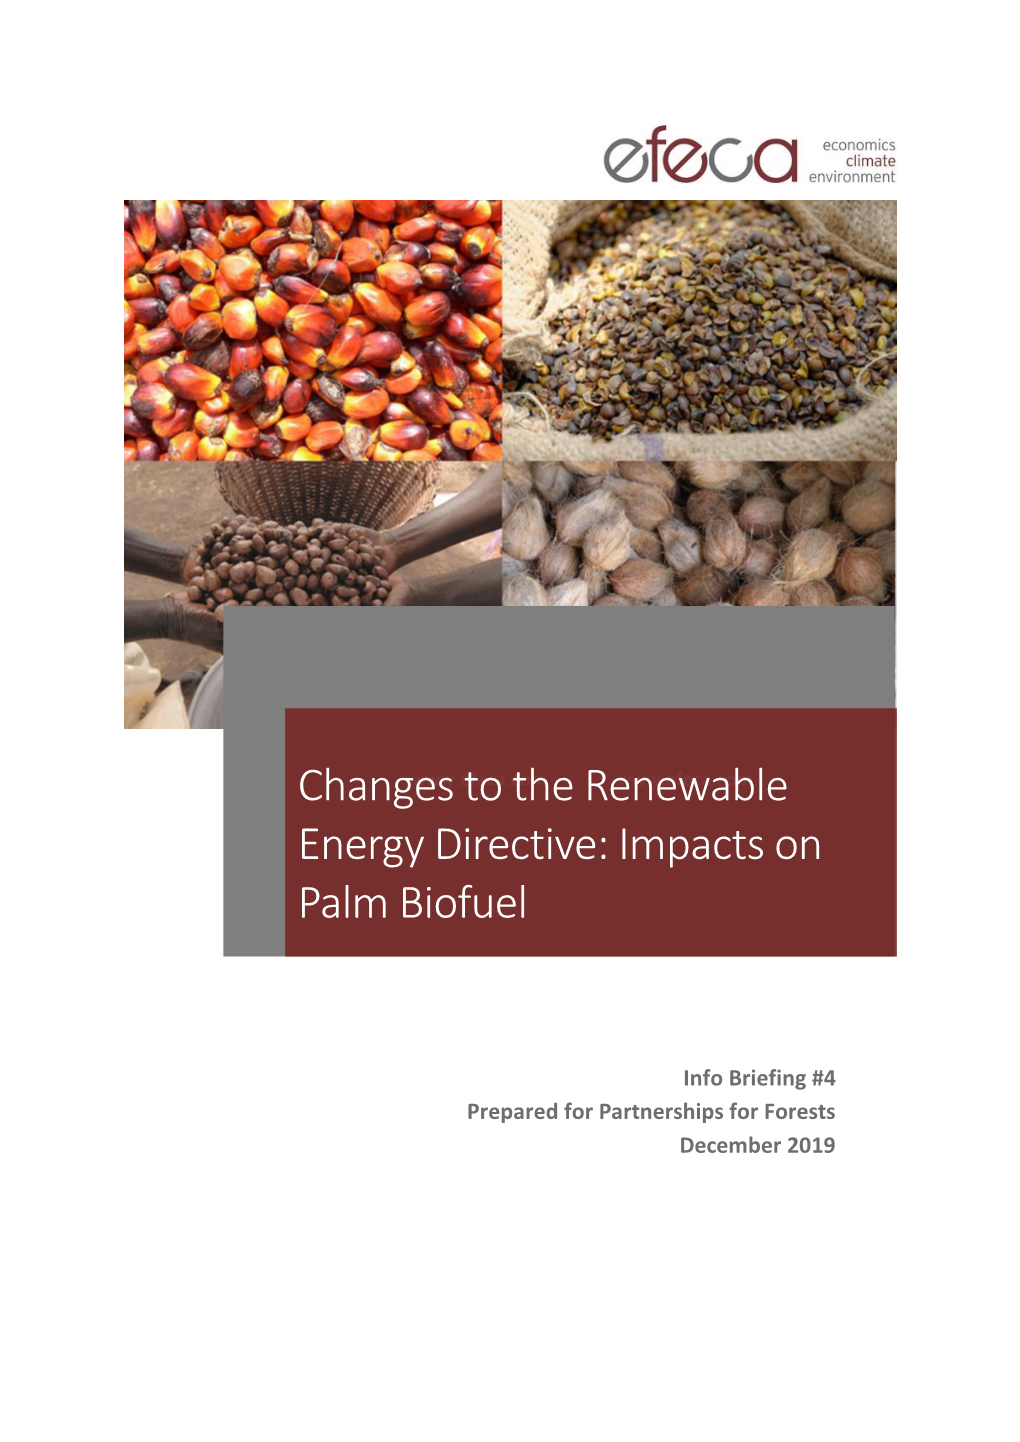 Changes to the Renewable Energy Directive: Impacts on Palm Biofuel